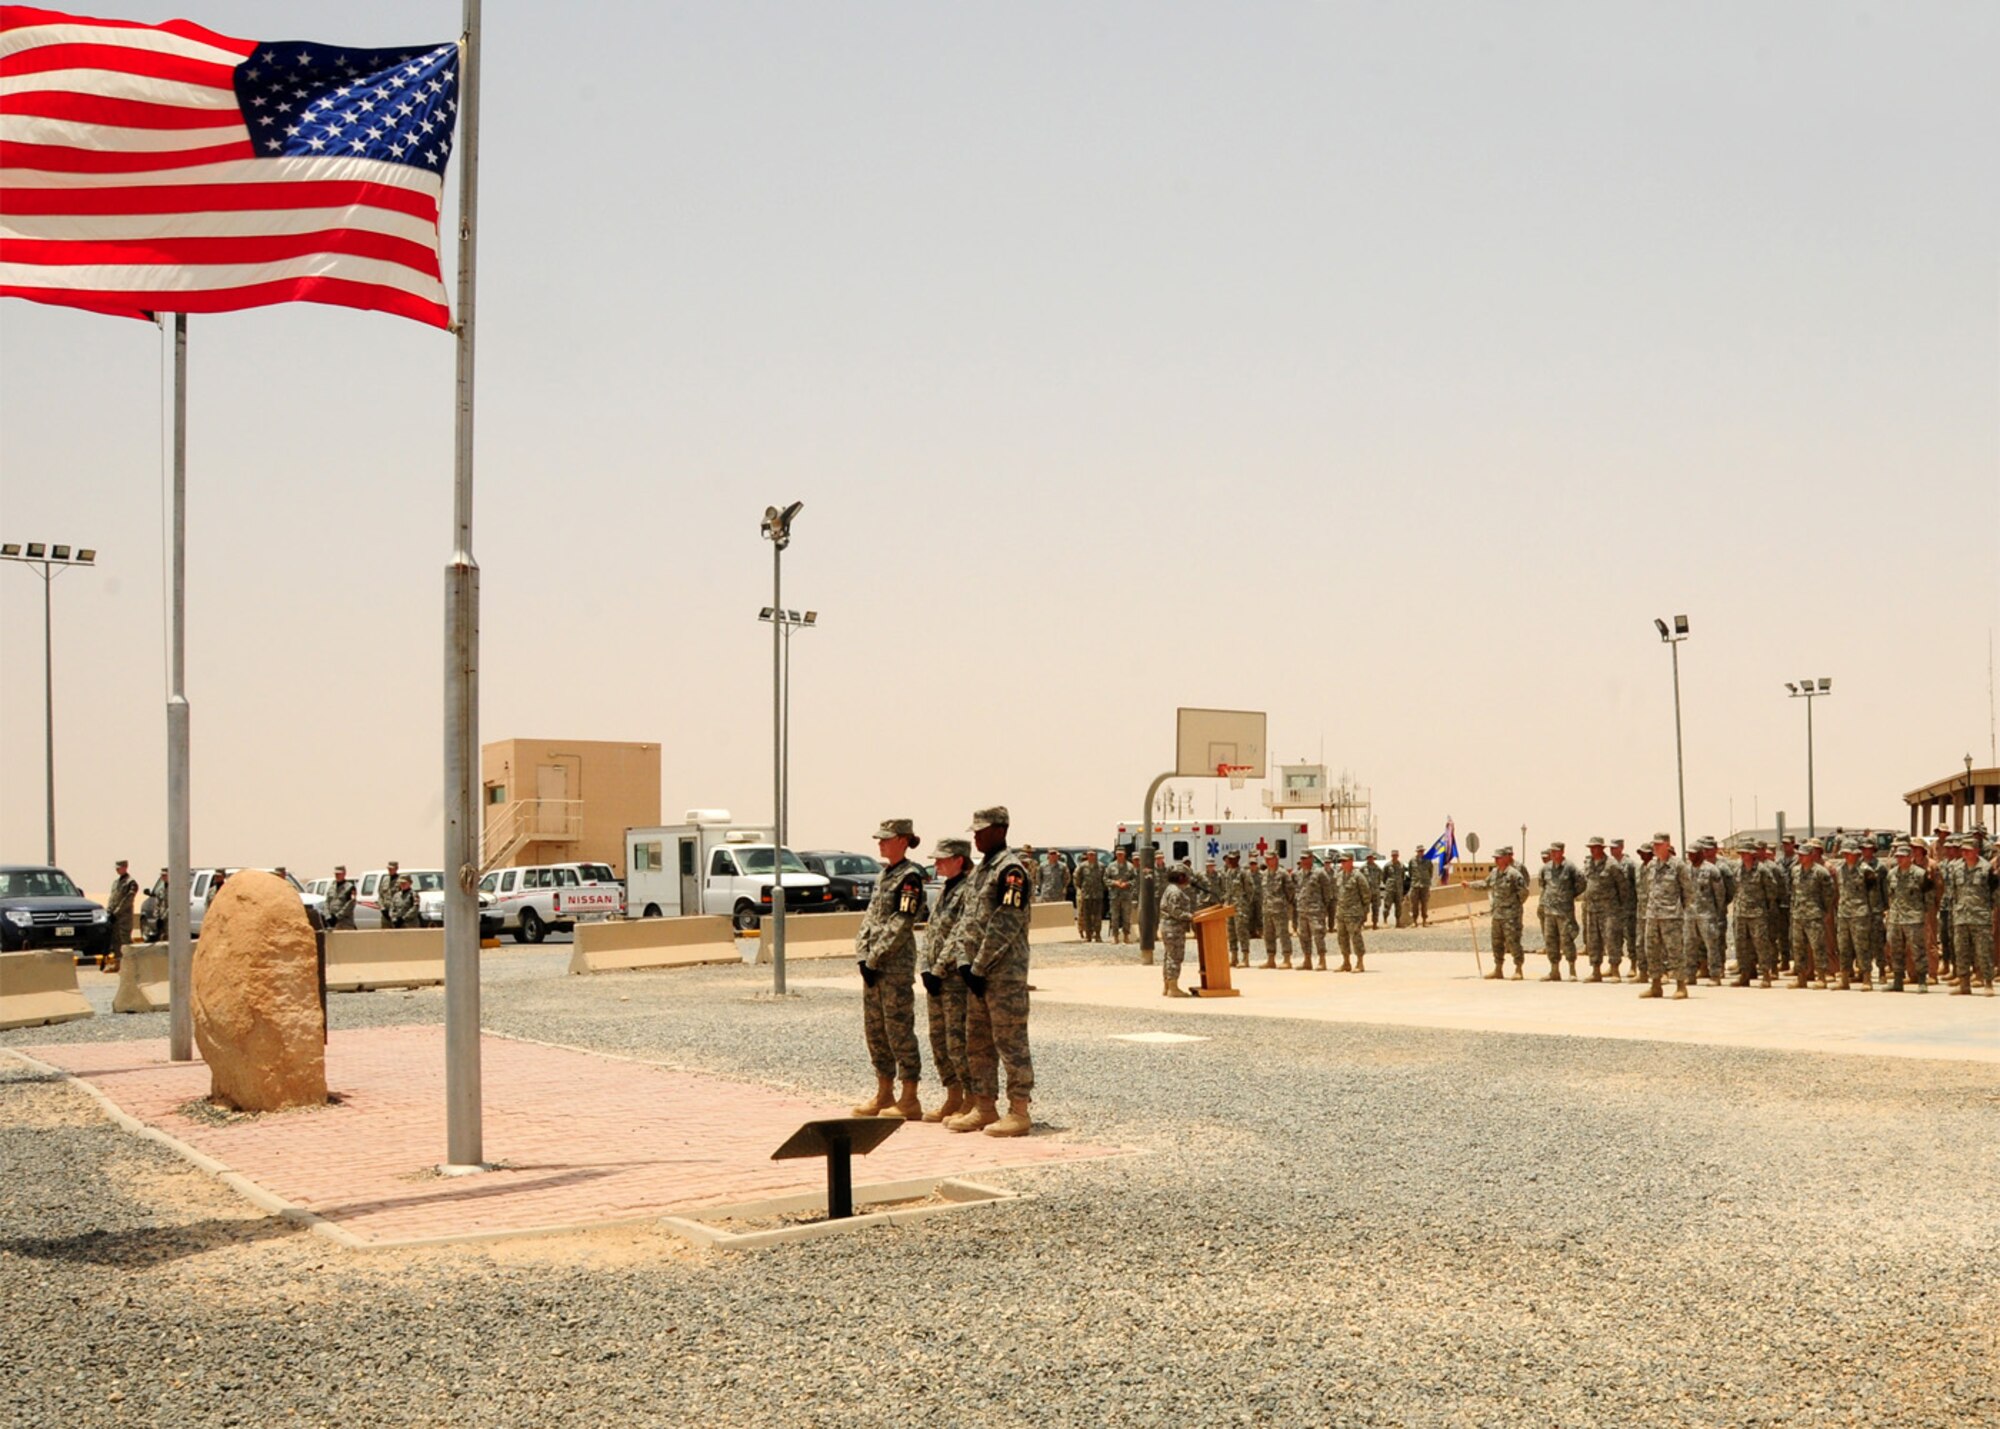 SOUTHWEST ASIA -- Airmen and personnel from the 386th Air Expeditionary Wing stand at attention during the Memorial Day ceremony at an air base in Southwest Asia, May 25. Memorial Day, originally called Decoration Day, is annually on the last Monday in May in the United States in honor of the nation's armed services personnel killed in wartime. (U.S. Air Force photo/ Senior Airman Courtney Richardson)